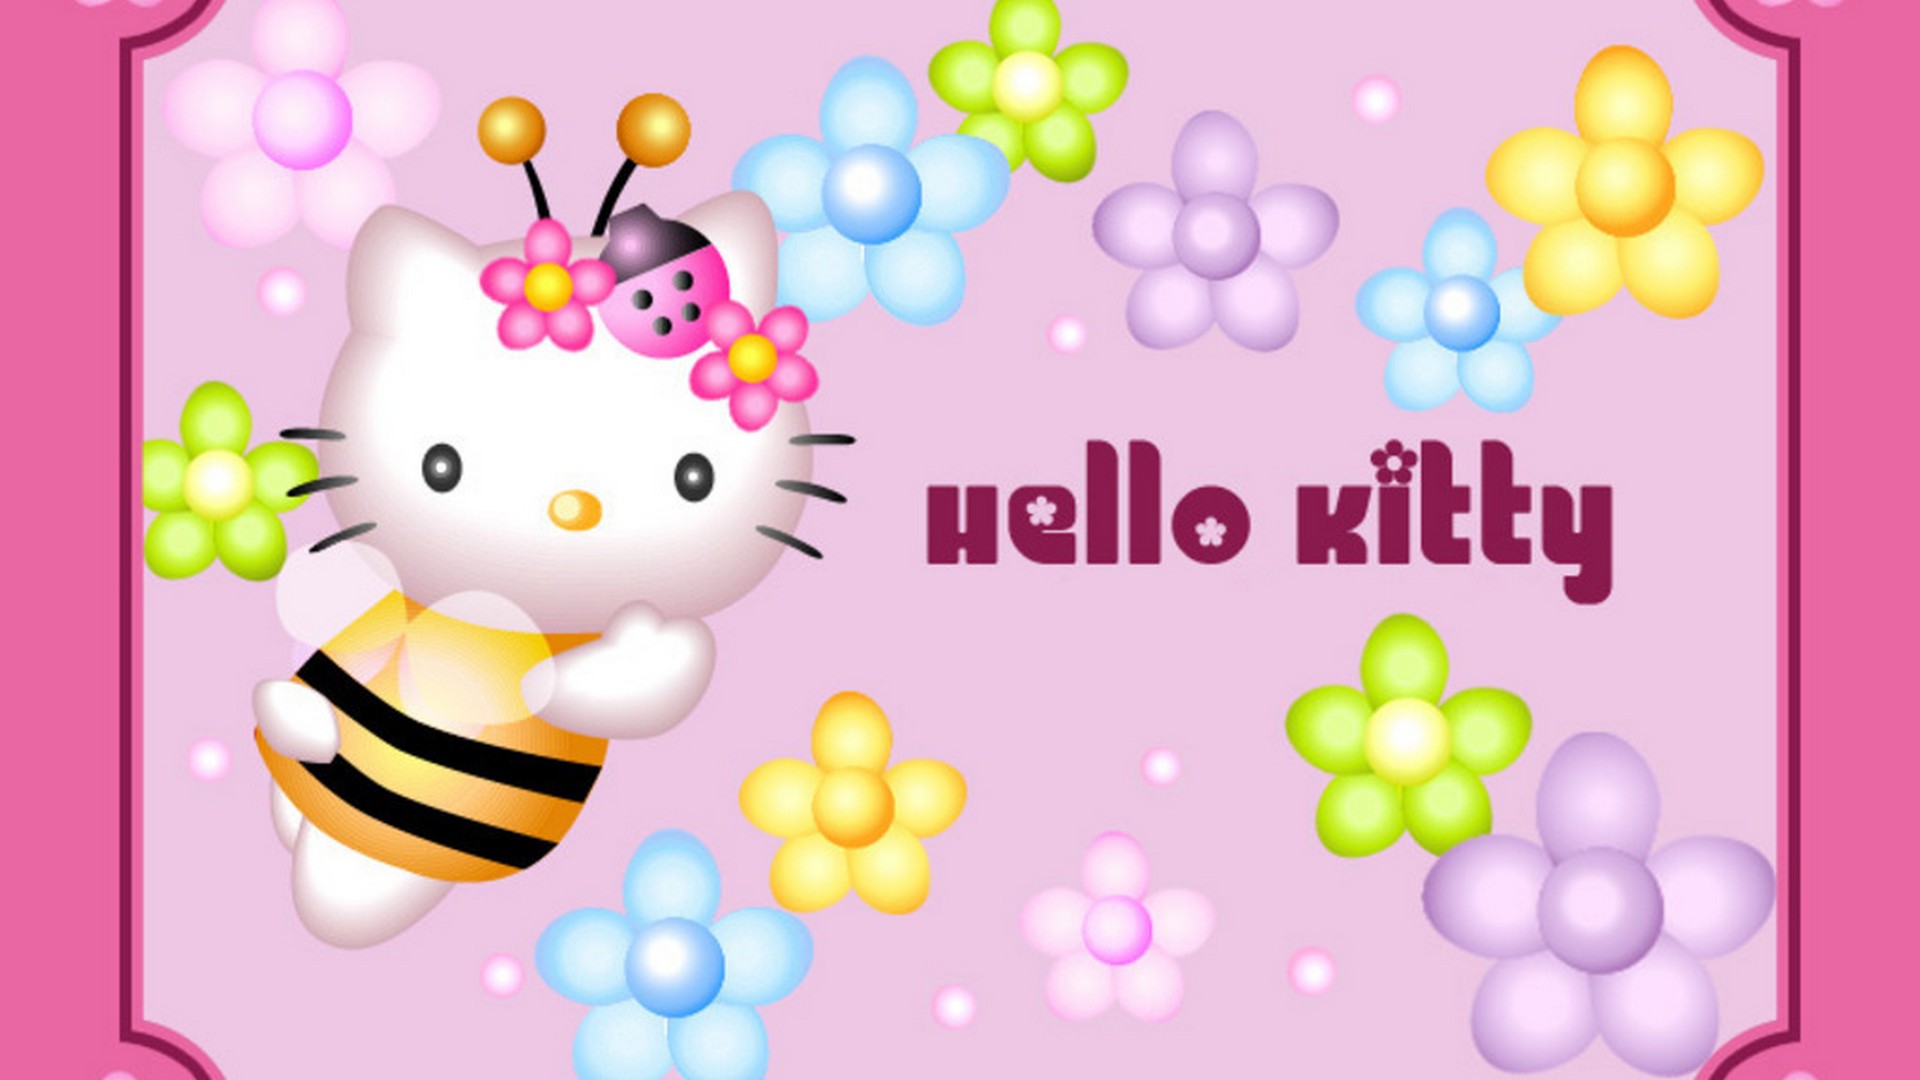 Wallpaper HD Hello Kitty Pictures with image resolution 1920x1080 pixel. You can make this wallpaper for your Desktop Computer Backgrounds, Mac Wallpapers, Android Lock screen or iPhone Screensavers